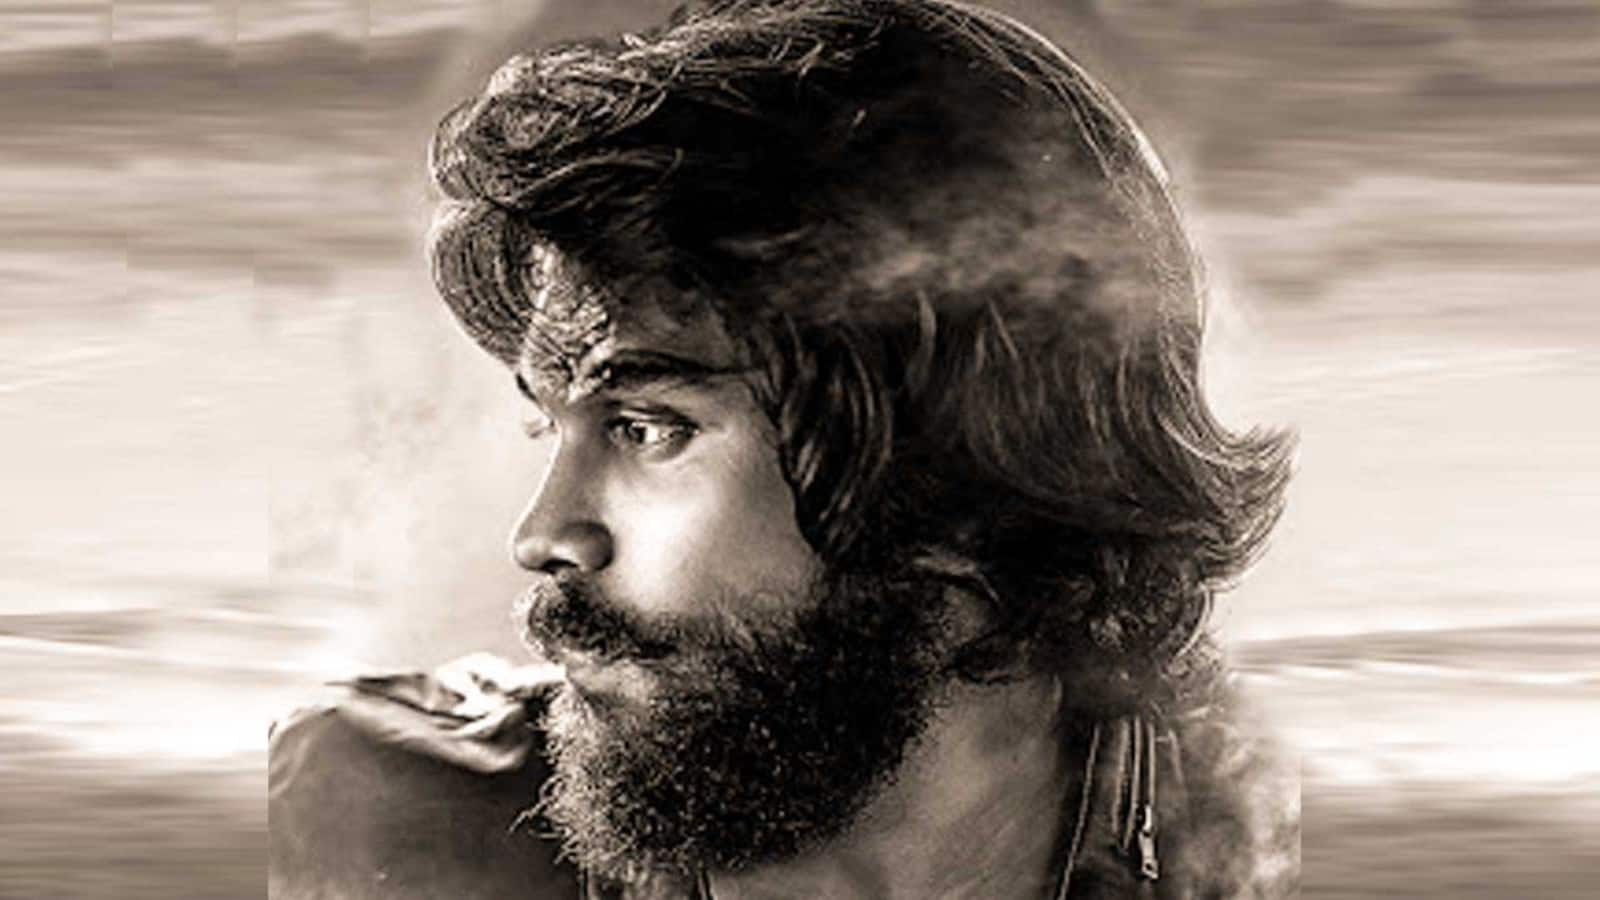 Makers of Arjun Reddy Tamil remake announce new cast and crew of the film –  deets inside - Bollywood News & Gossip, Movie Reviews, Trailers & Videos at  